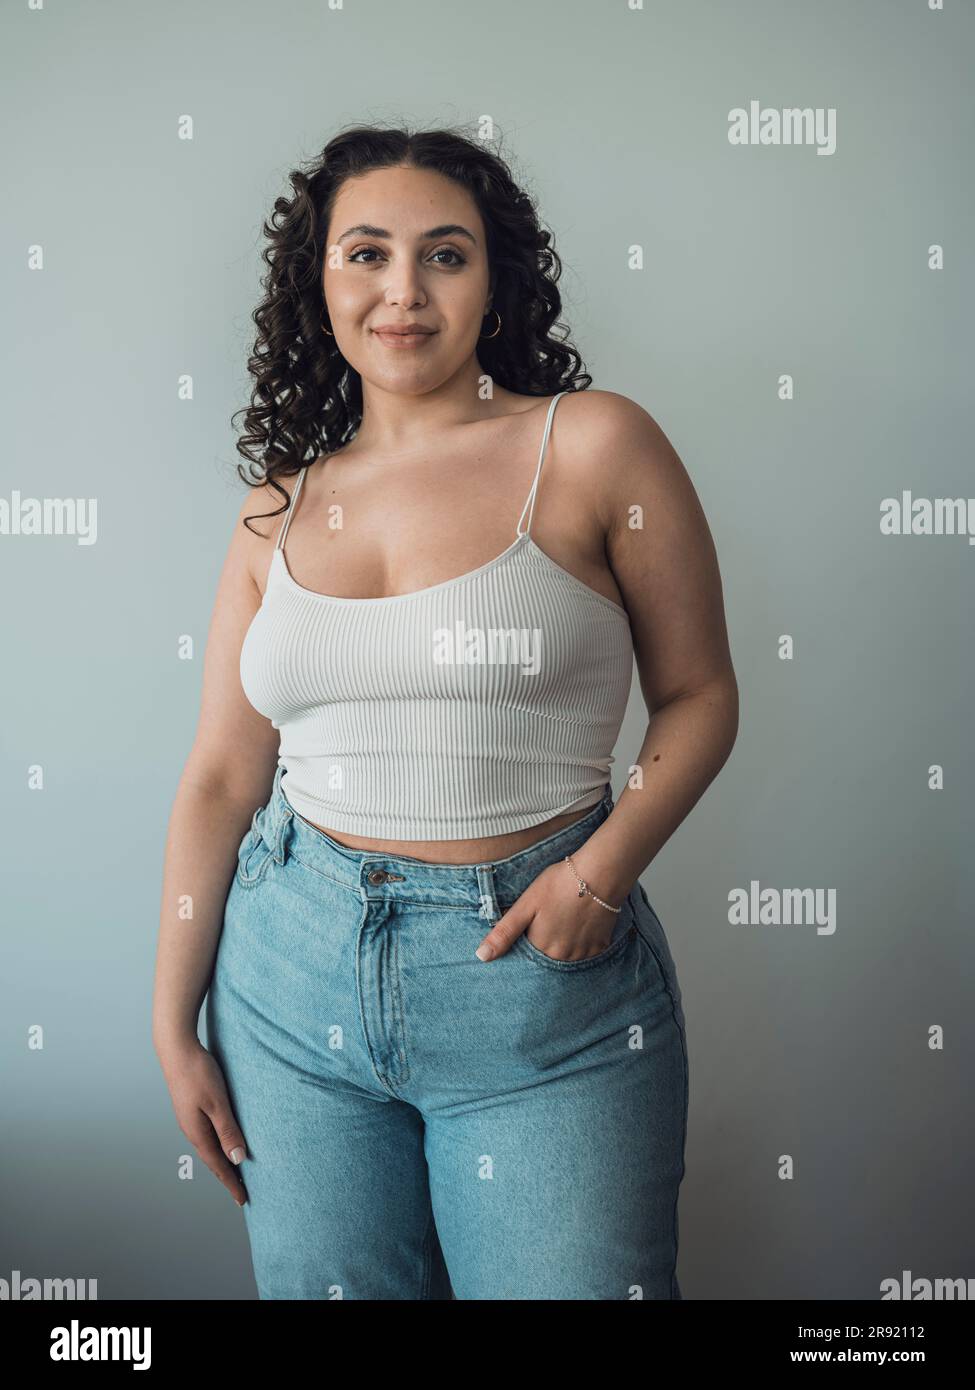 Curvy woman with hand in pocket standing in front of wall Stock Photo -  Alamy